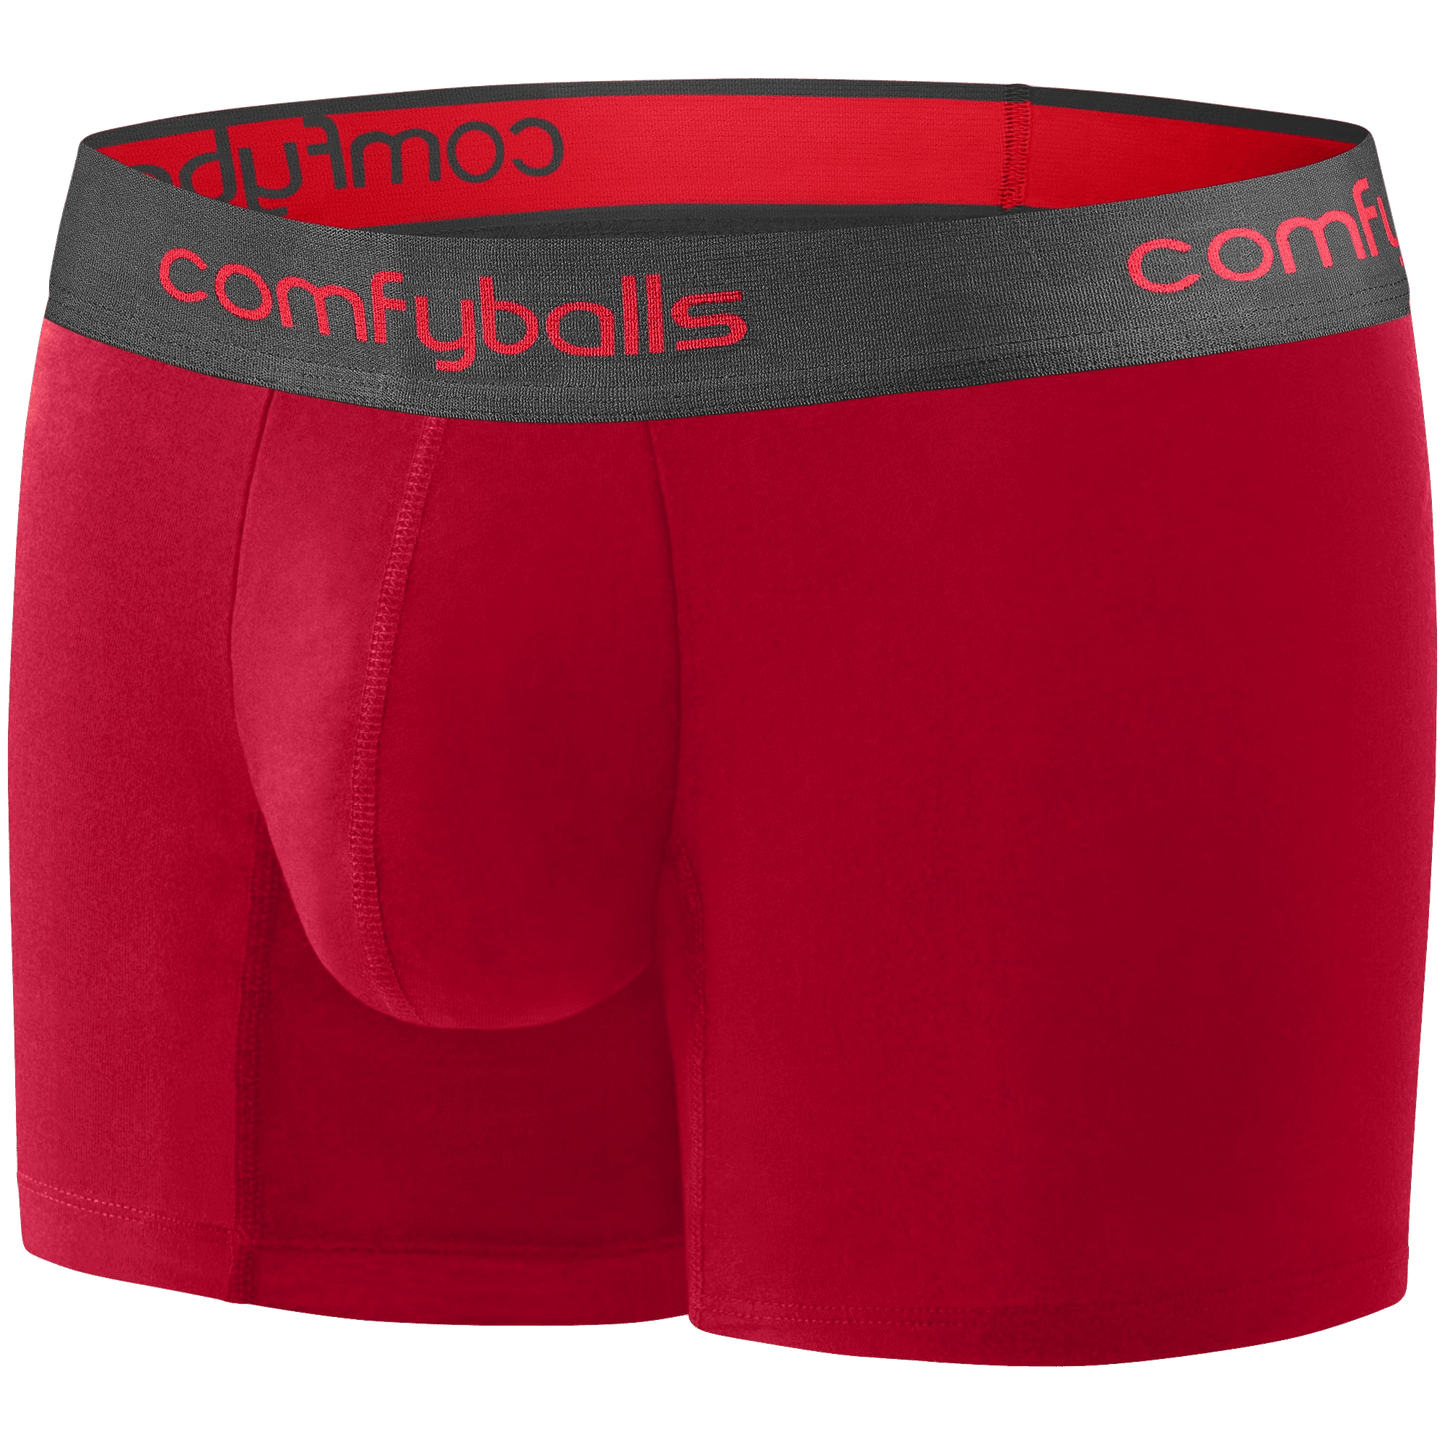 Red Charcoal Long Cotton Comfyballs boxers side